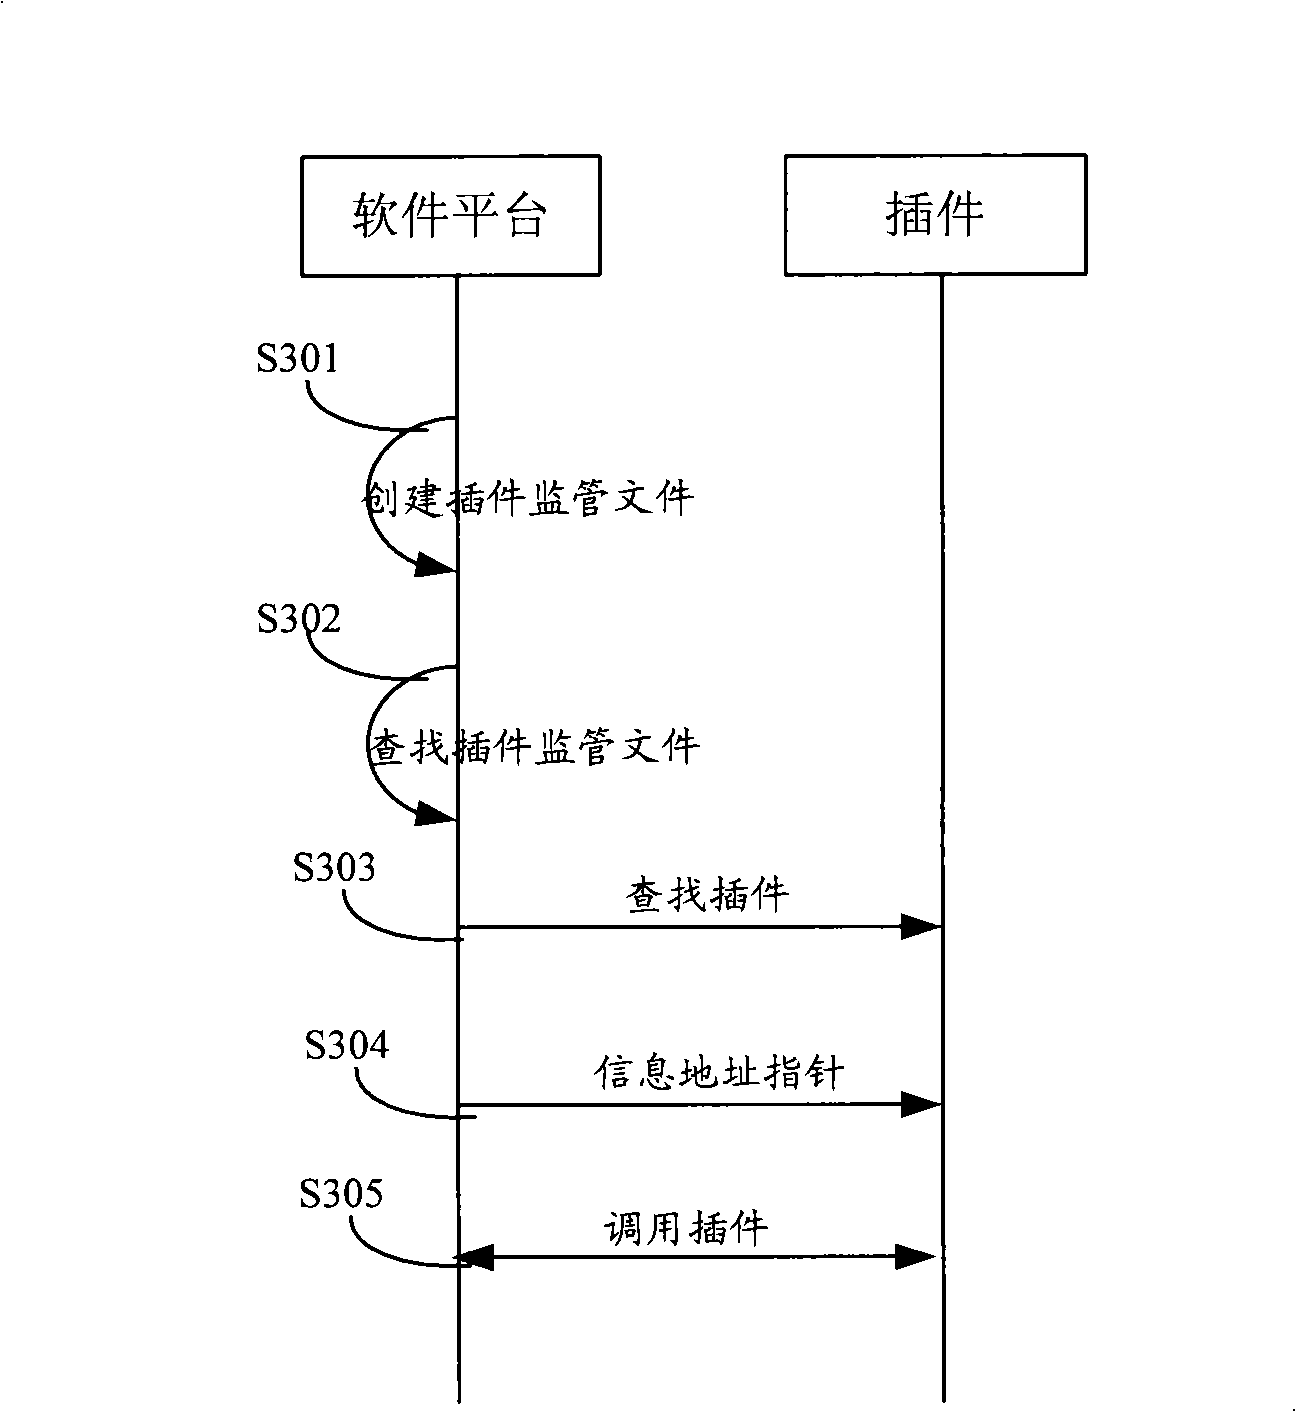 Method and system for extending function of software platform